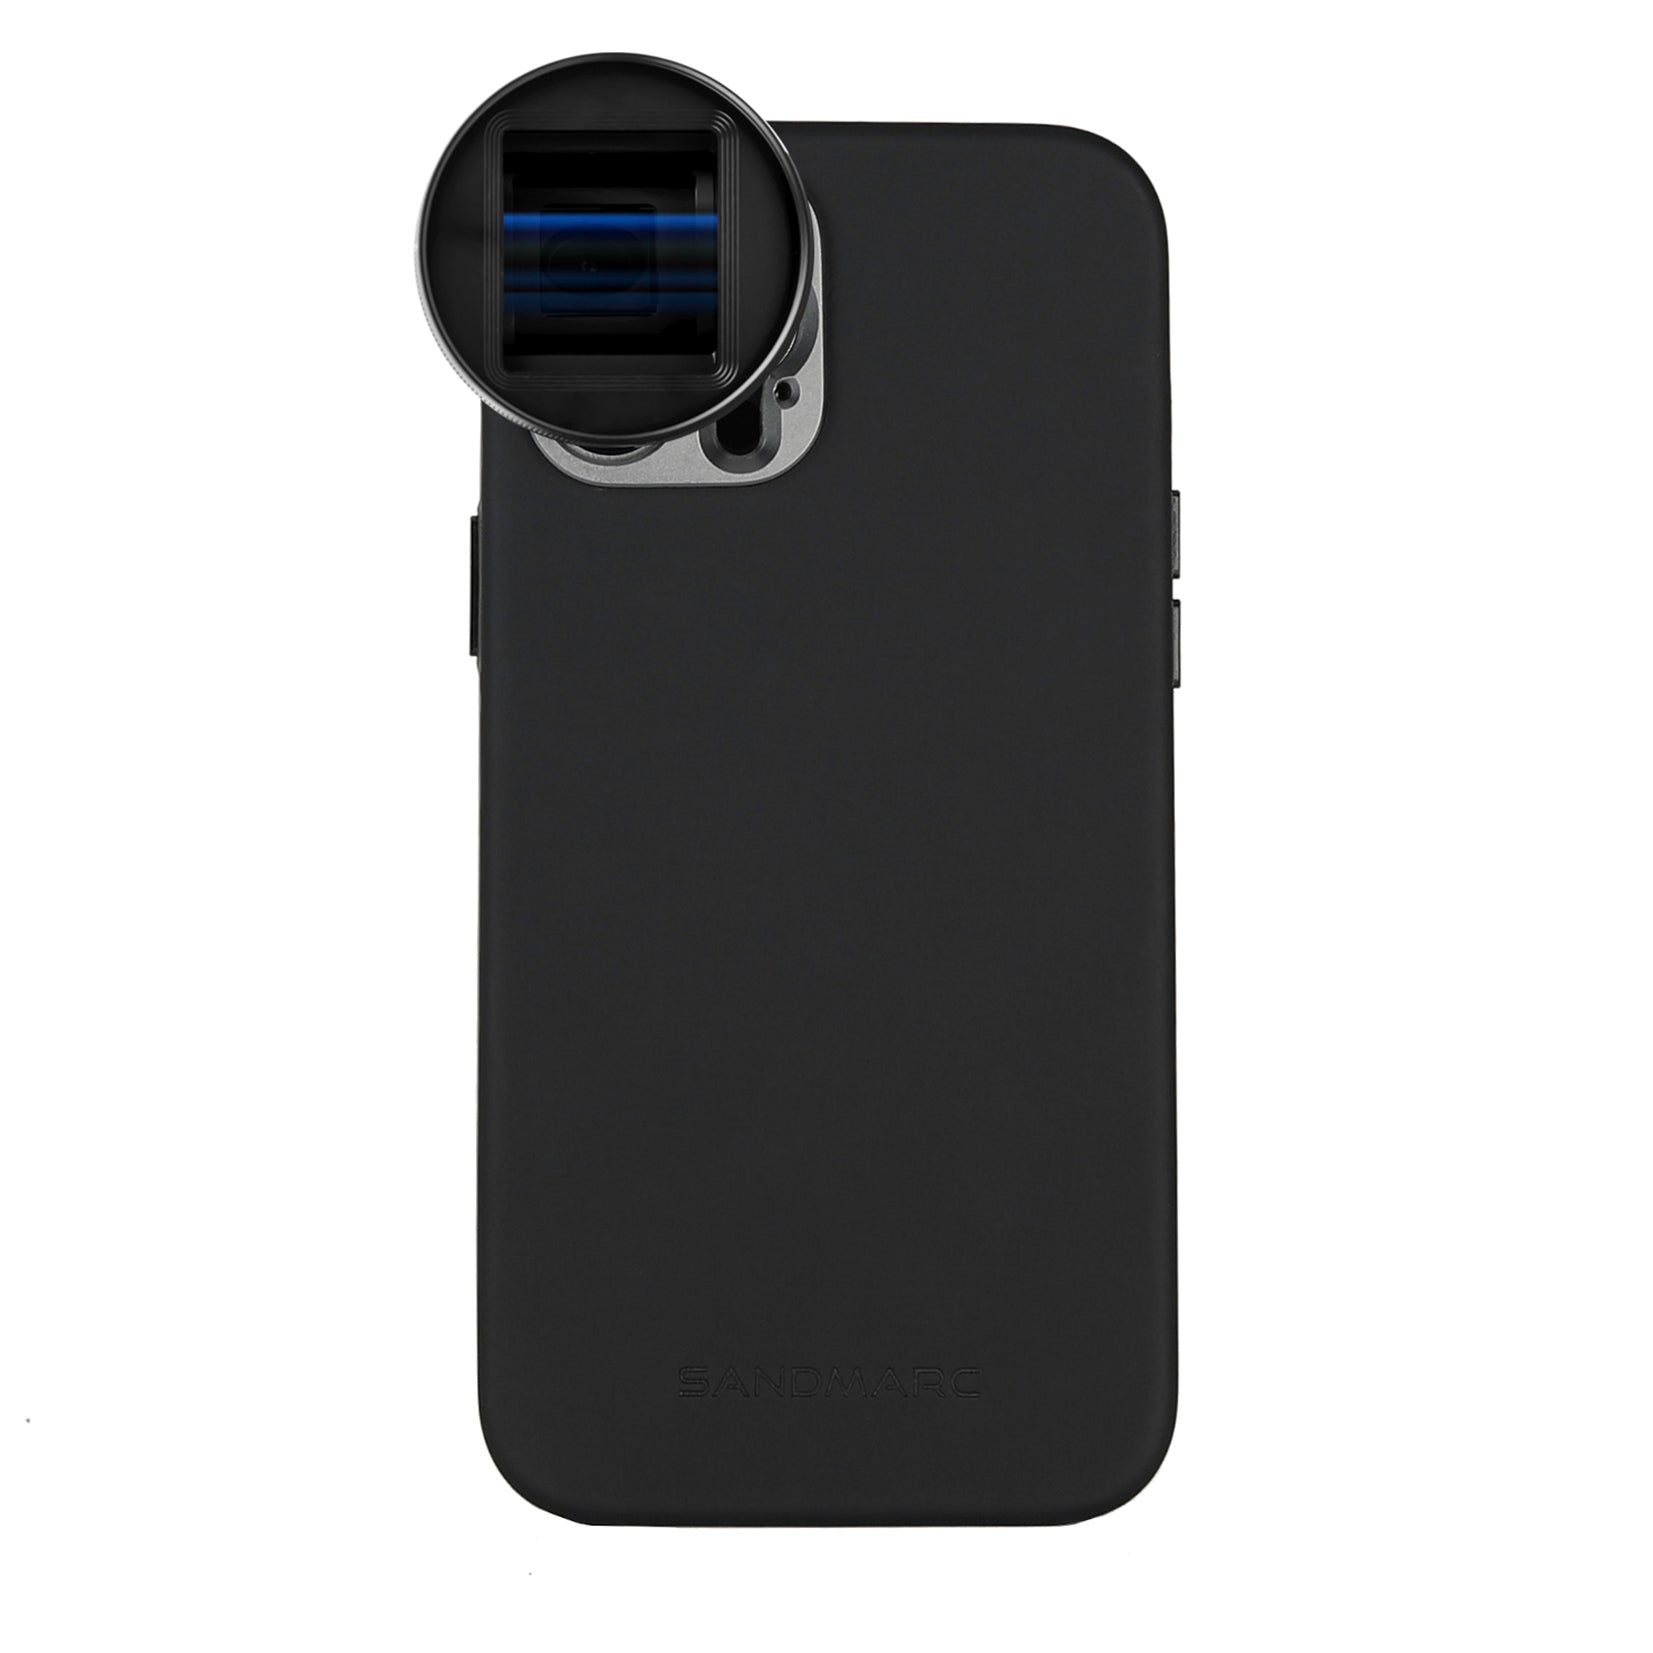 iPhone 12 Pro Max Case - works with MagSafe